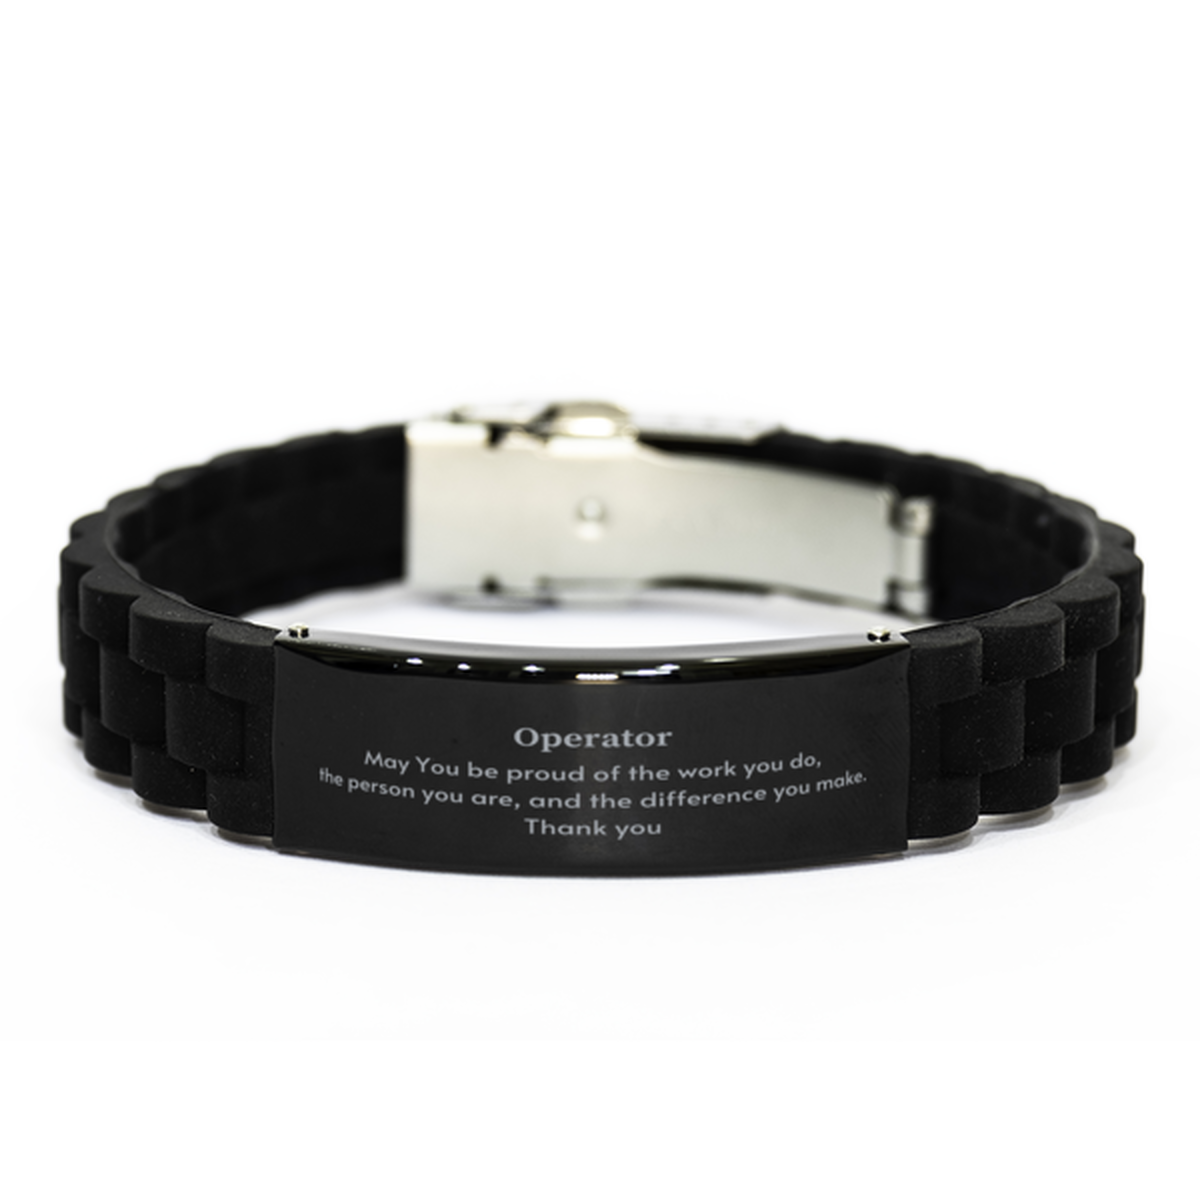 Heartwarming Black Glidelock Clasp Bracelet Retirement Coworkers Gifts for Operator, Operator May You be proud of the work you do, the person you are Gifts for Boss Men Women Friends